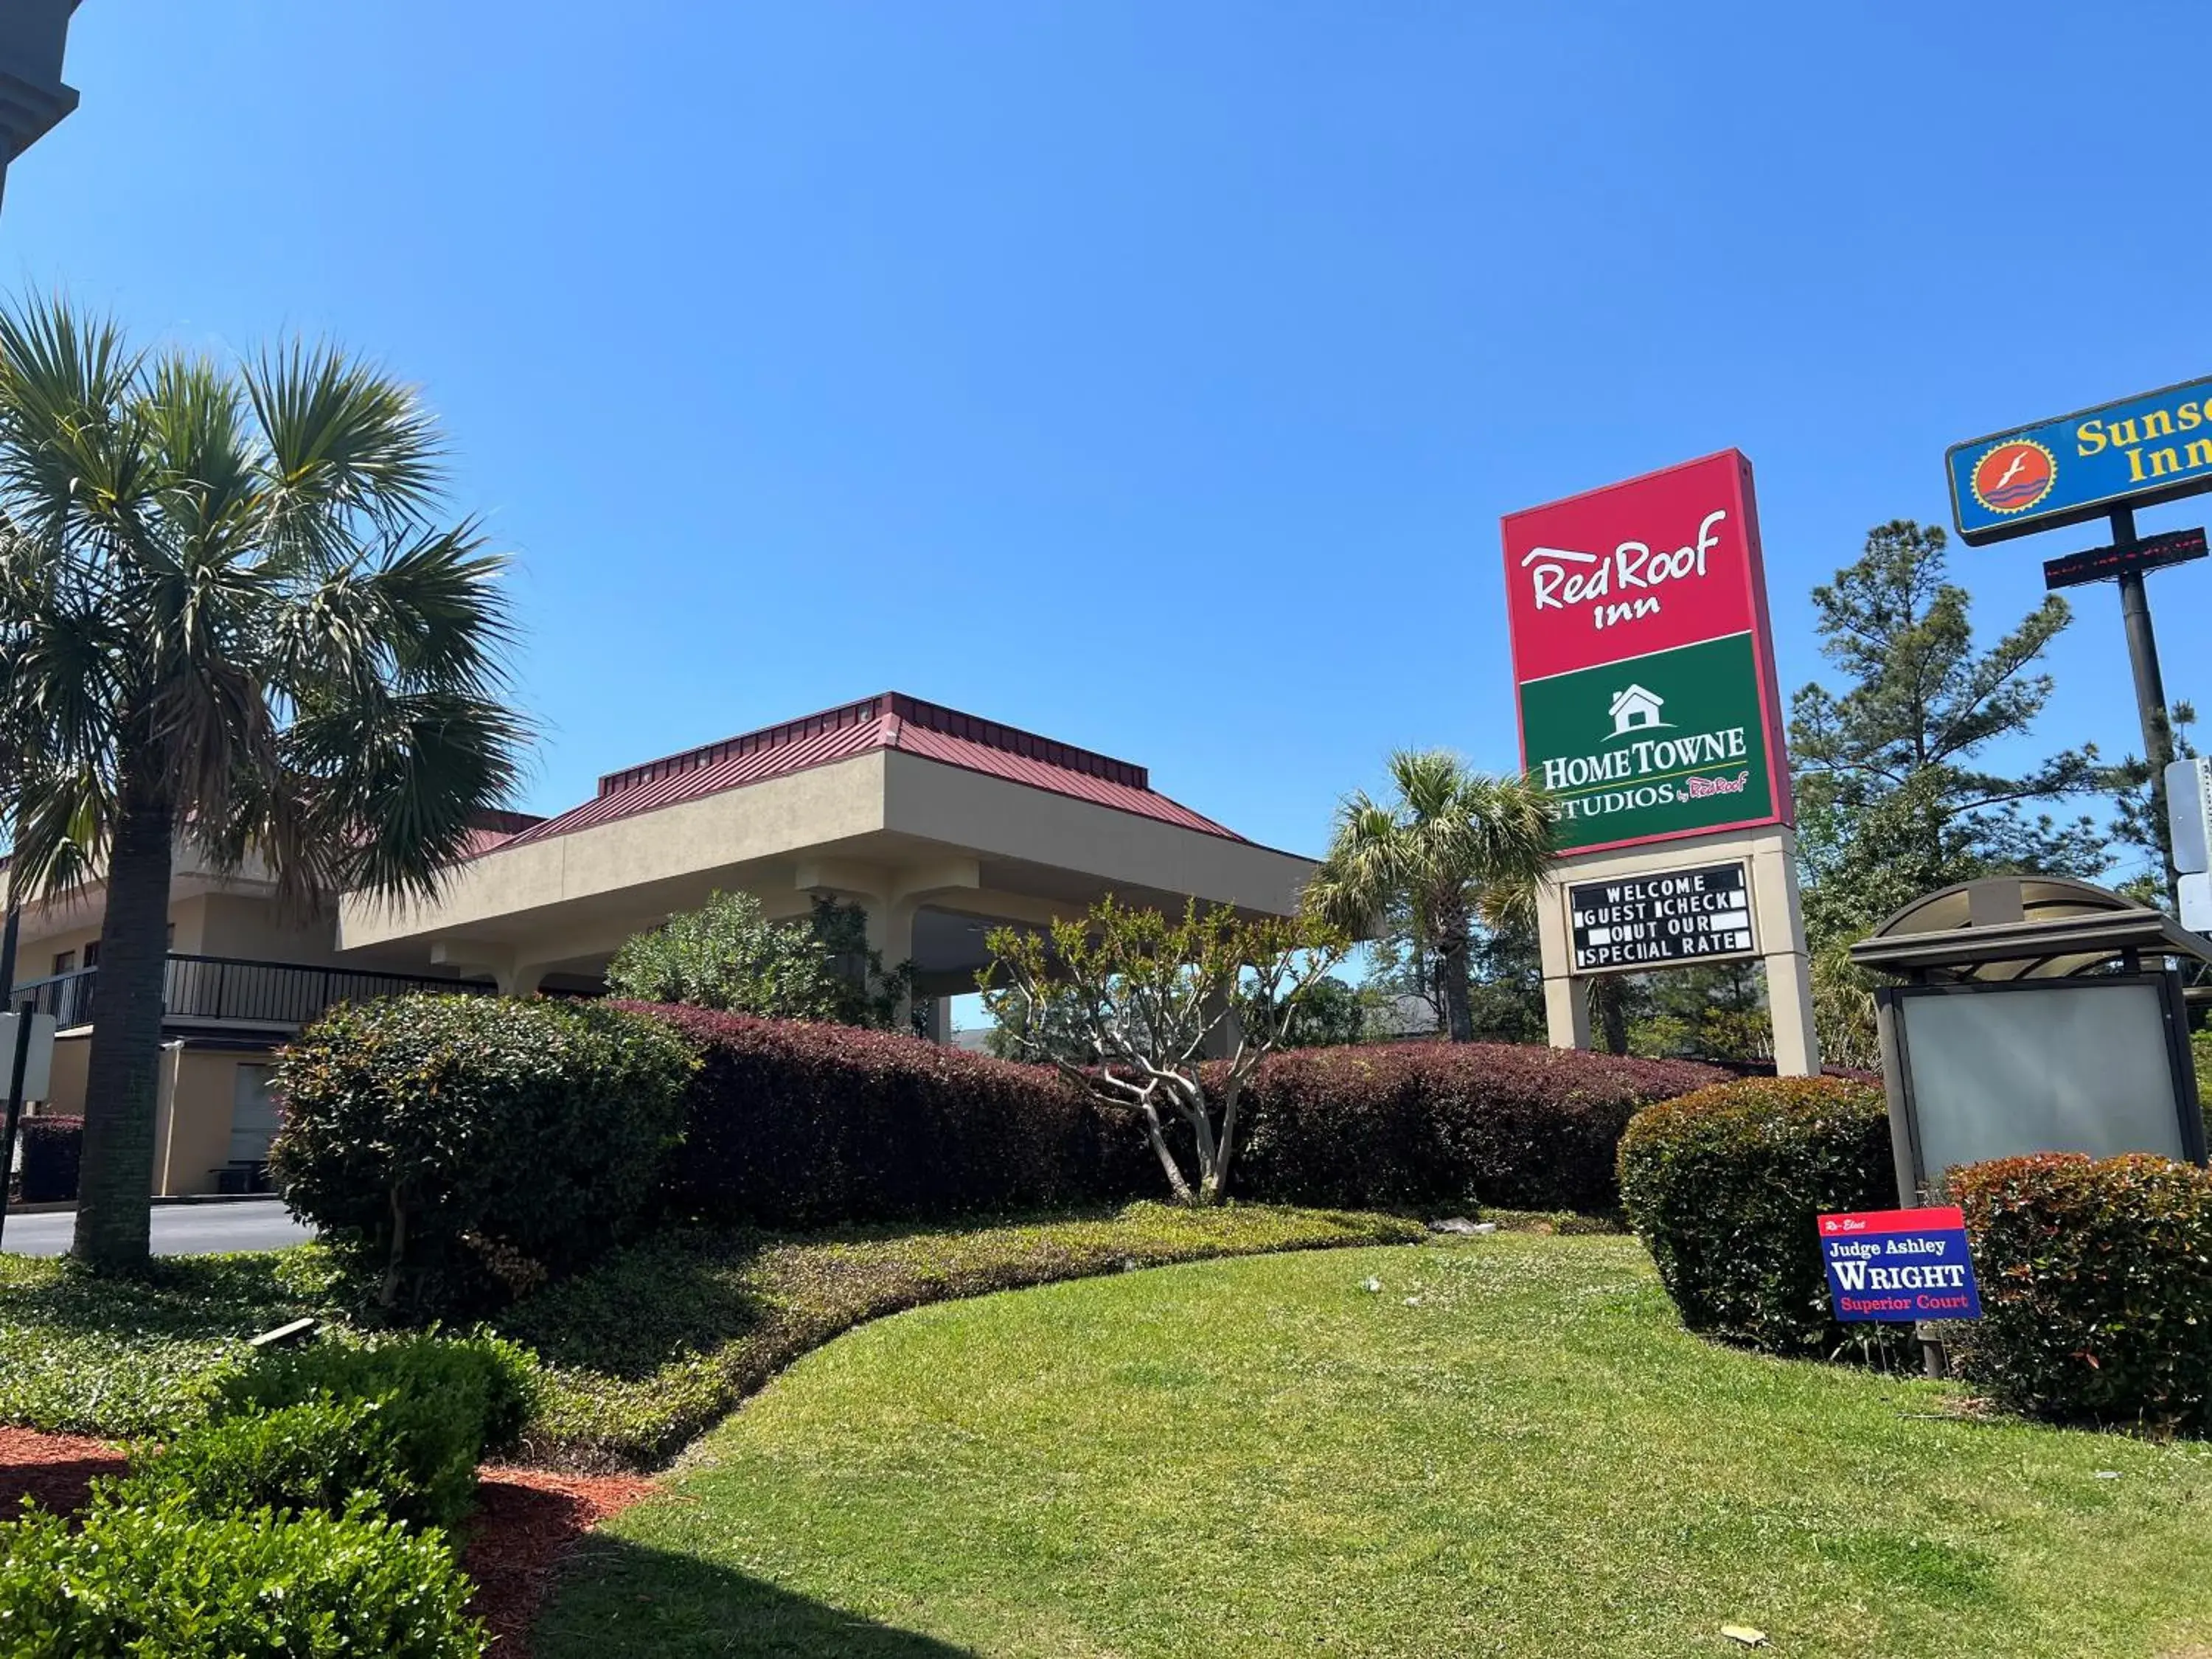 Property Building in Red Roof Inn Augusta – Washington Road